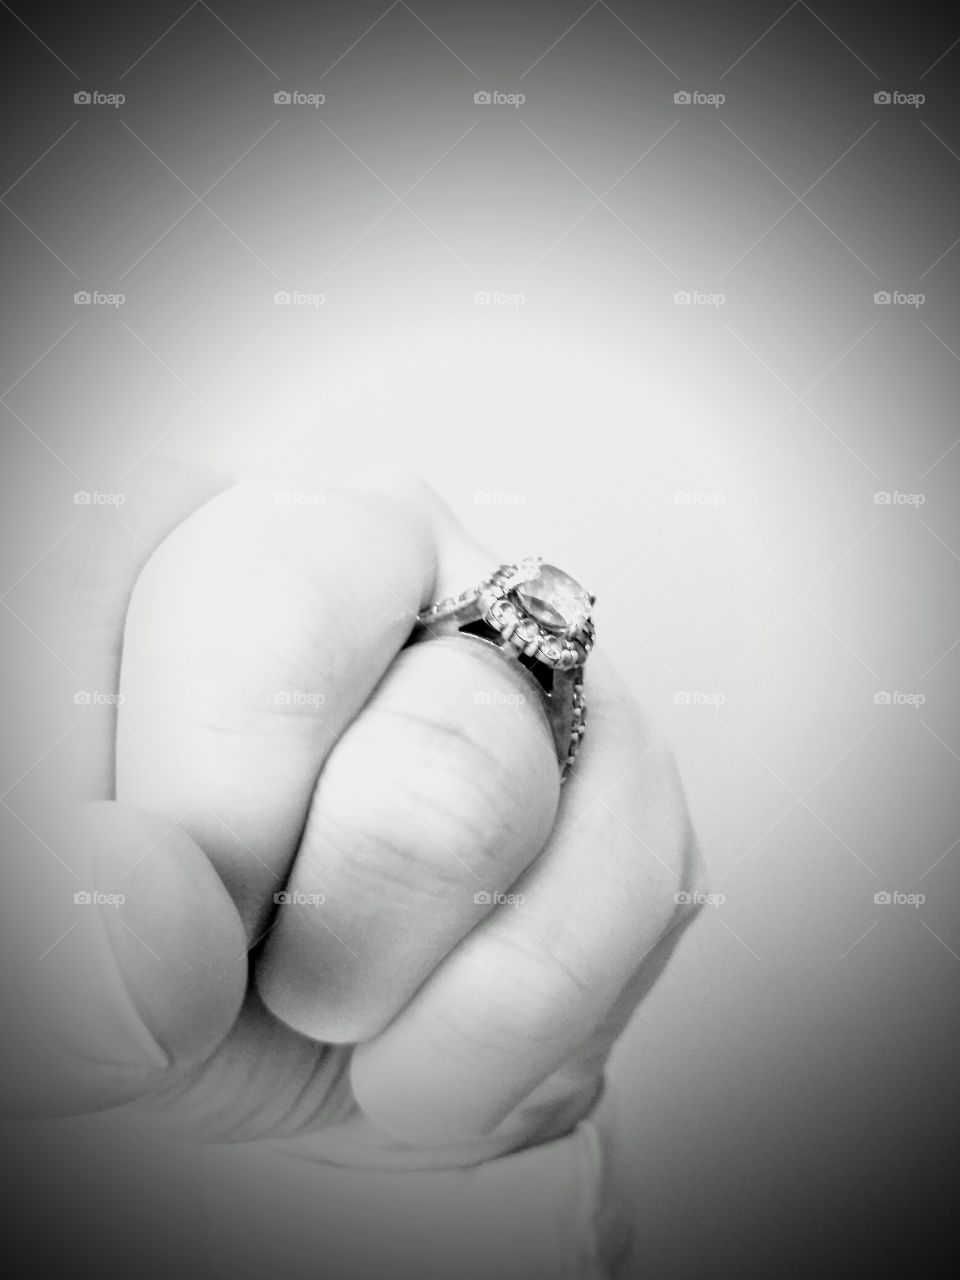 making a fist with a wedding ring on